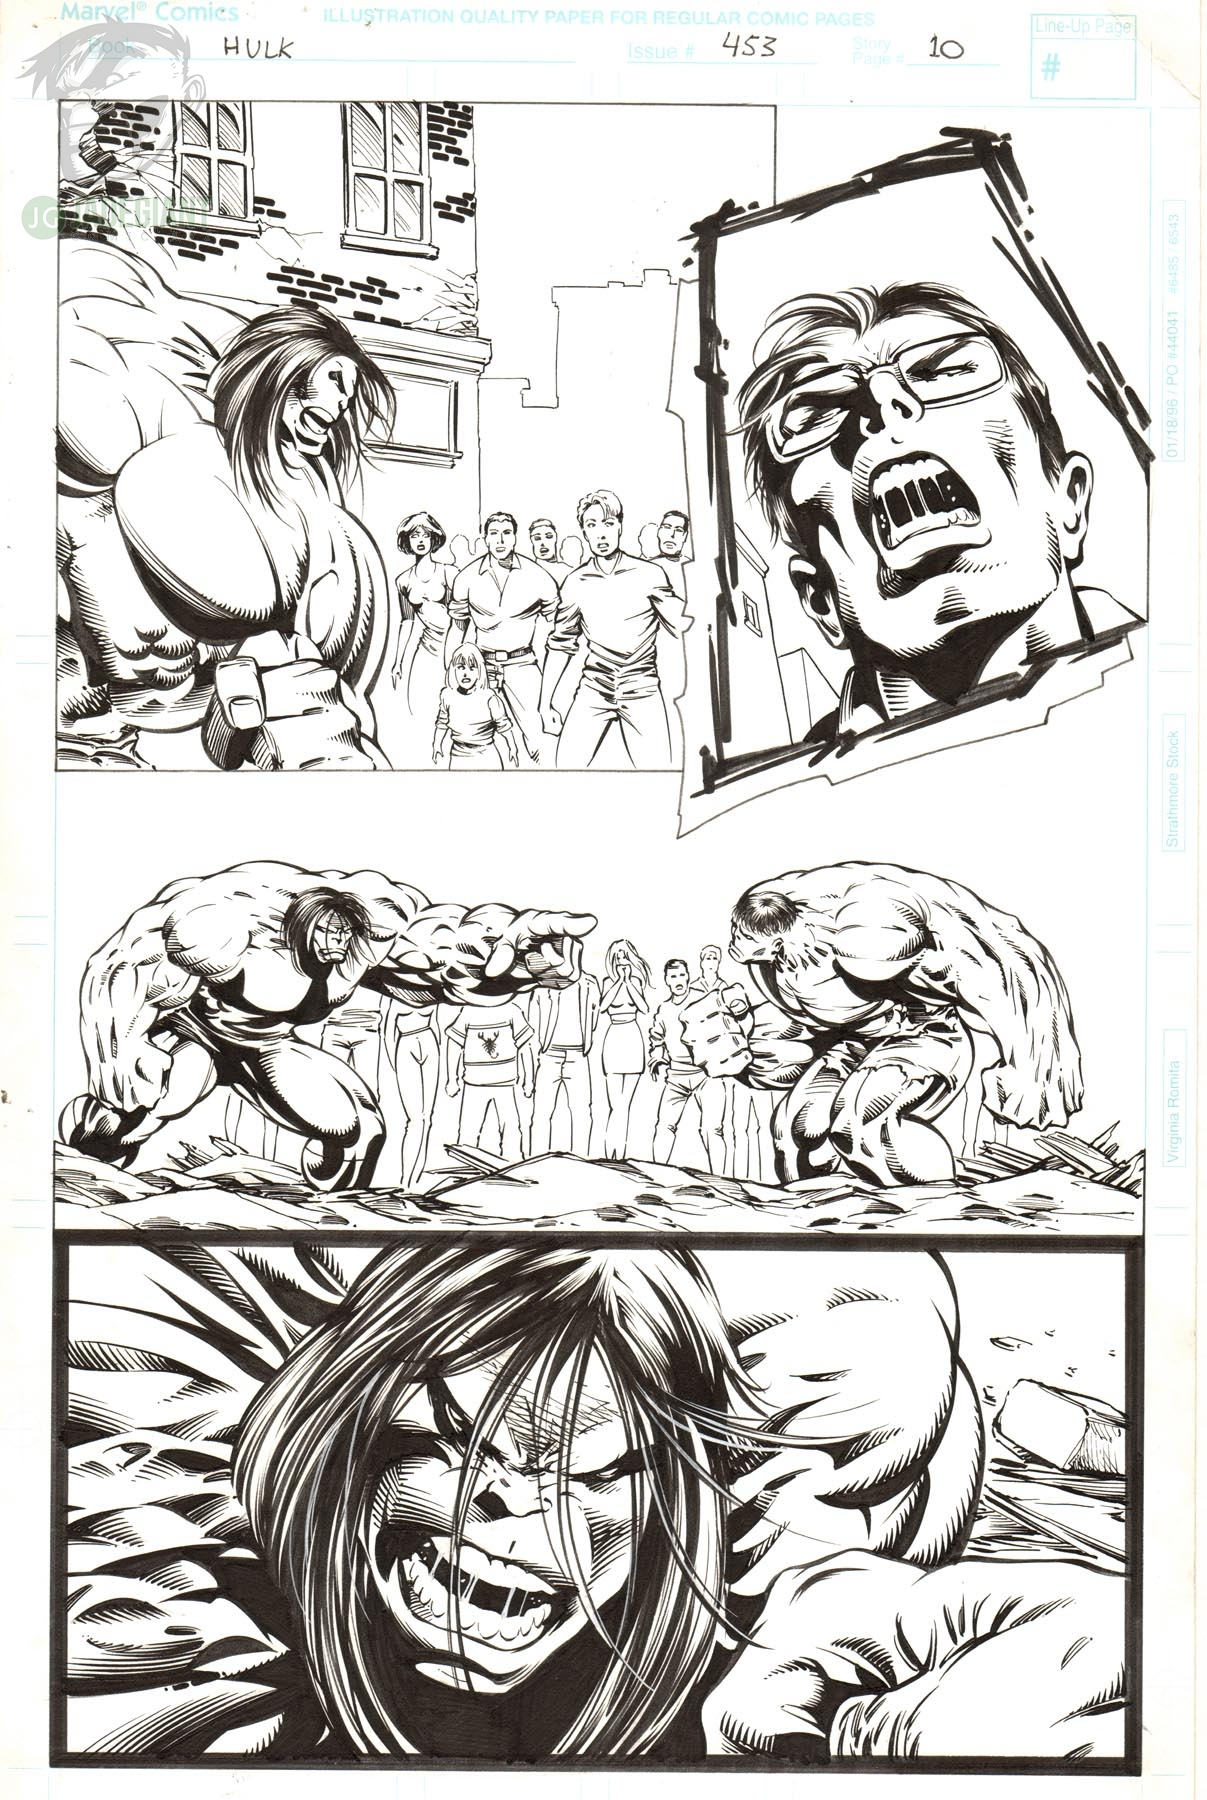 1997 Incredible Hulk 453 page 10 by Mike Deodato Comic Art